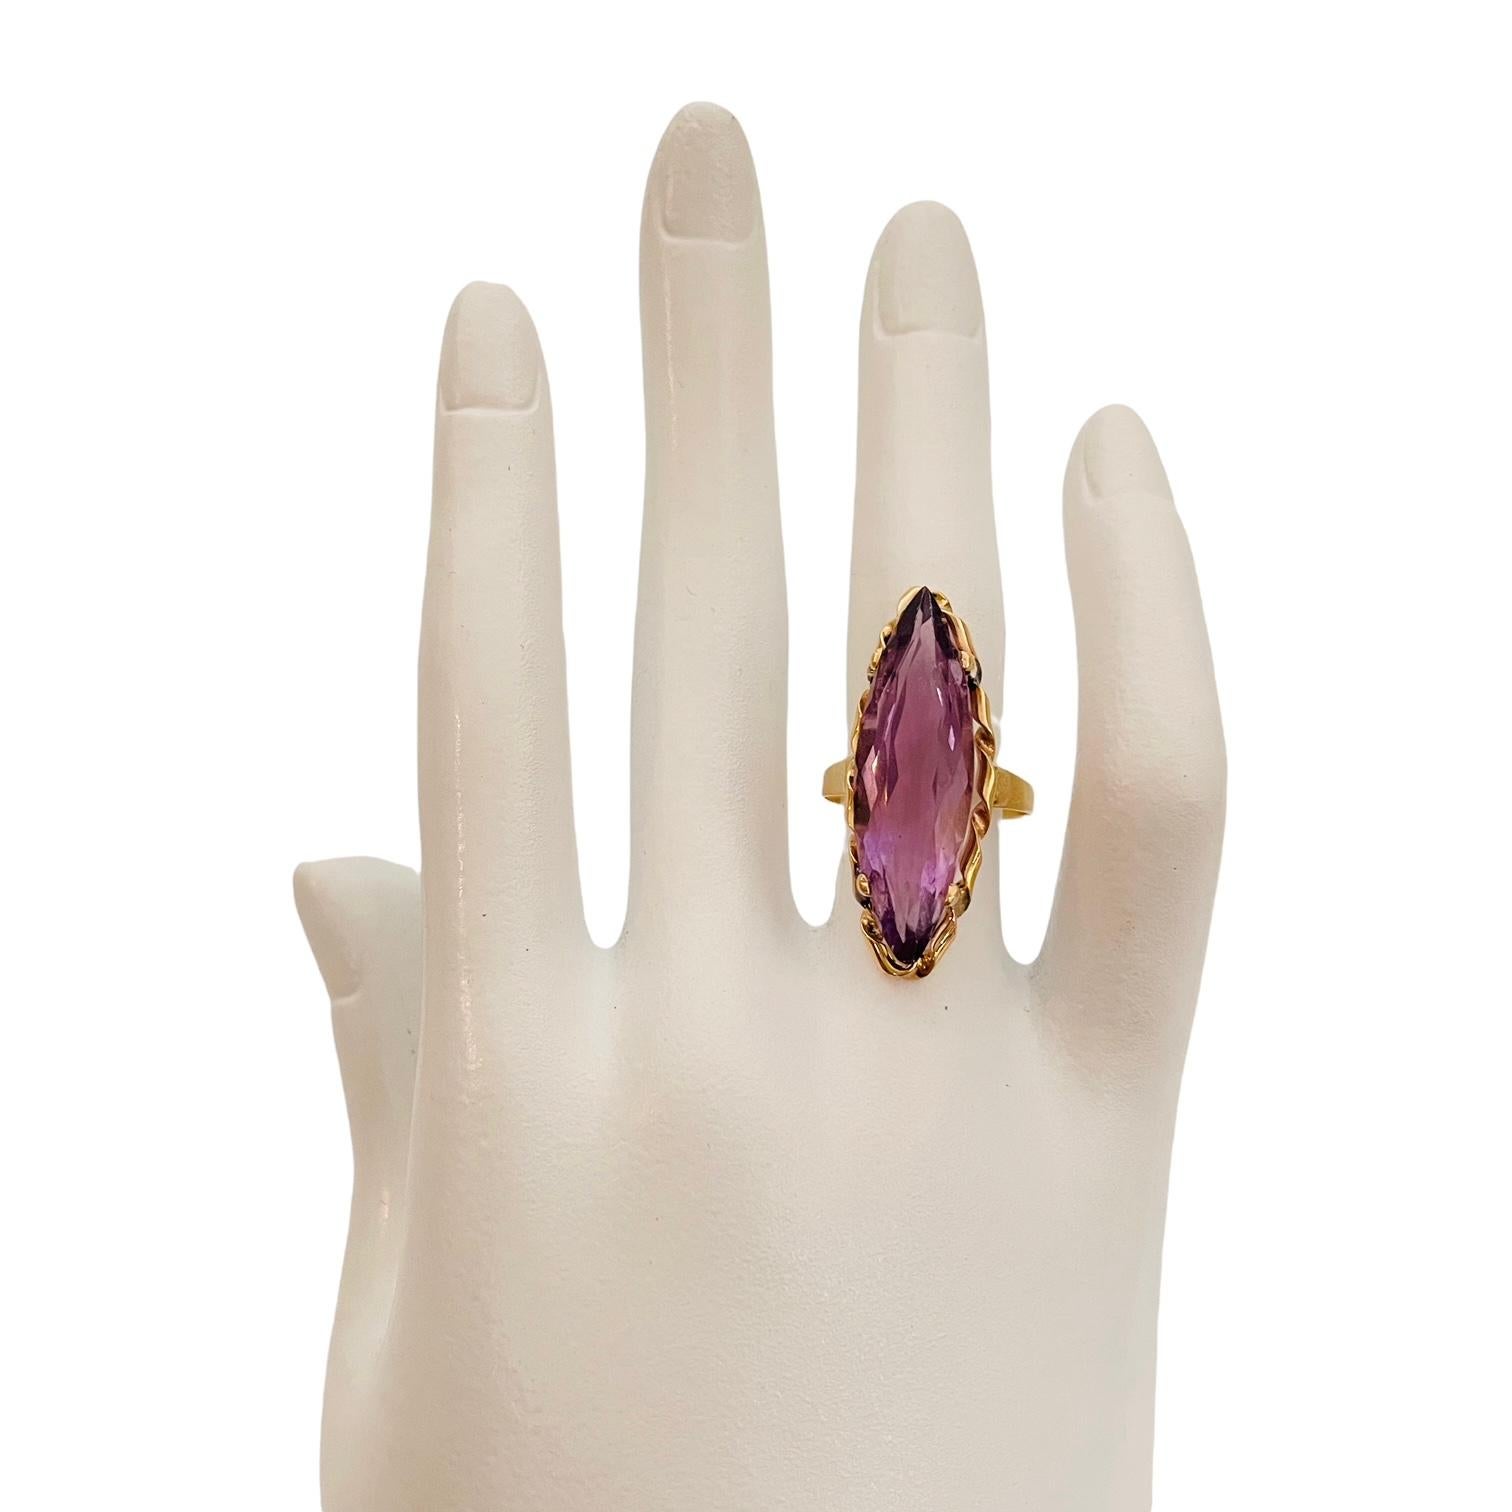 Art Deco 14k Yellow Gold Marquis Cut Amethyst Ring with Appraisal